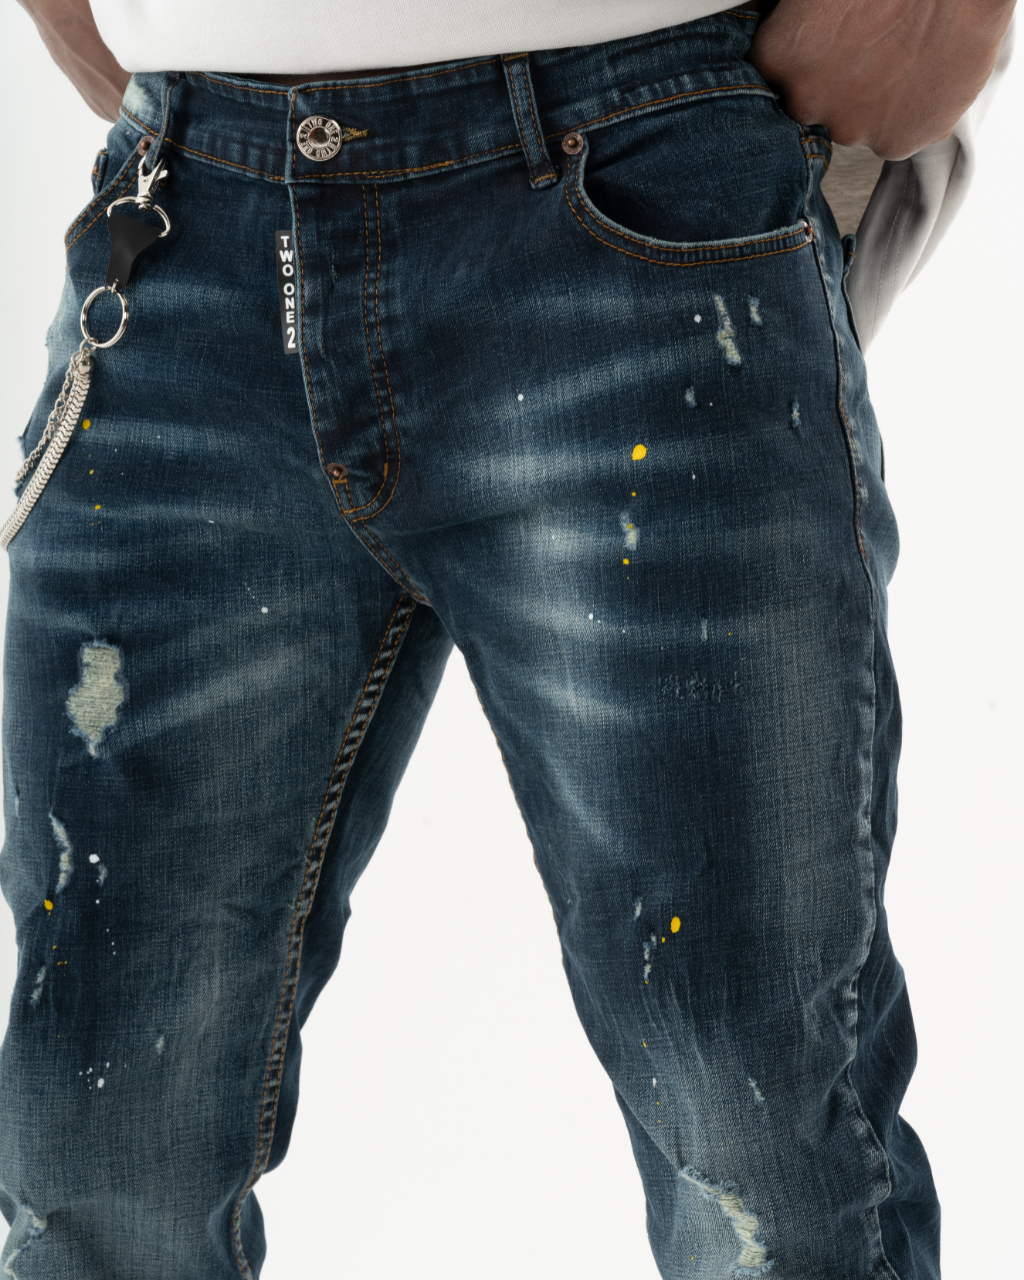 A man is wearing a pair of KUDOS jeans with stains on them.